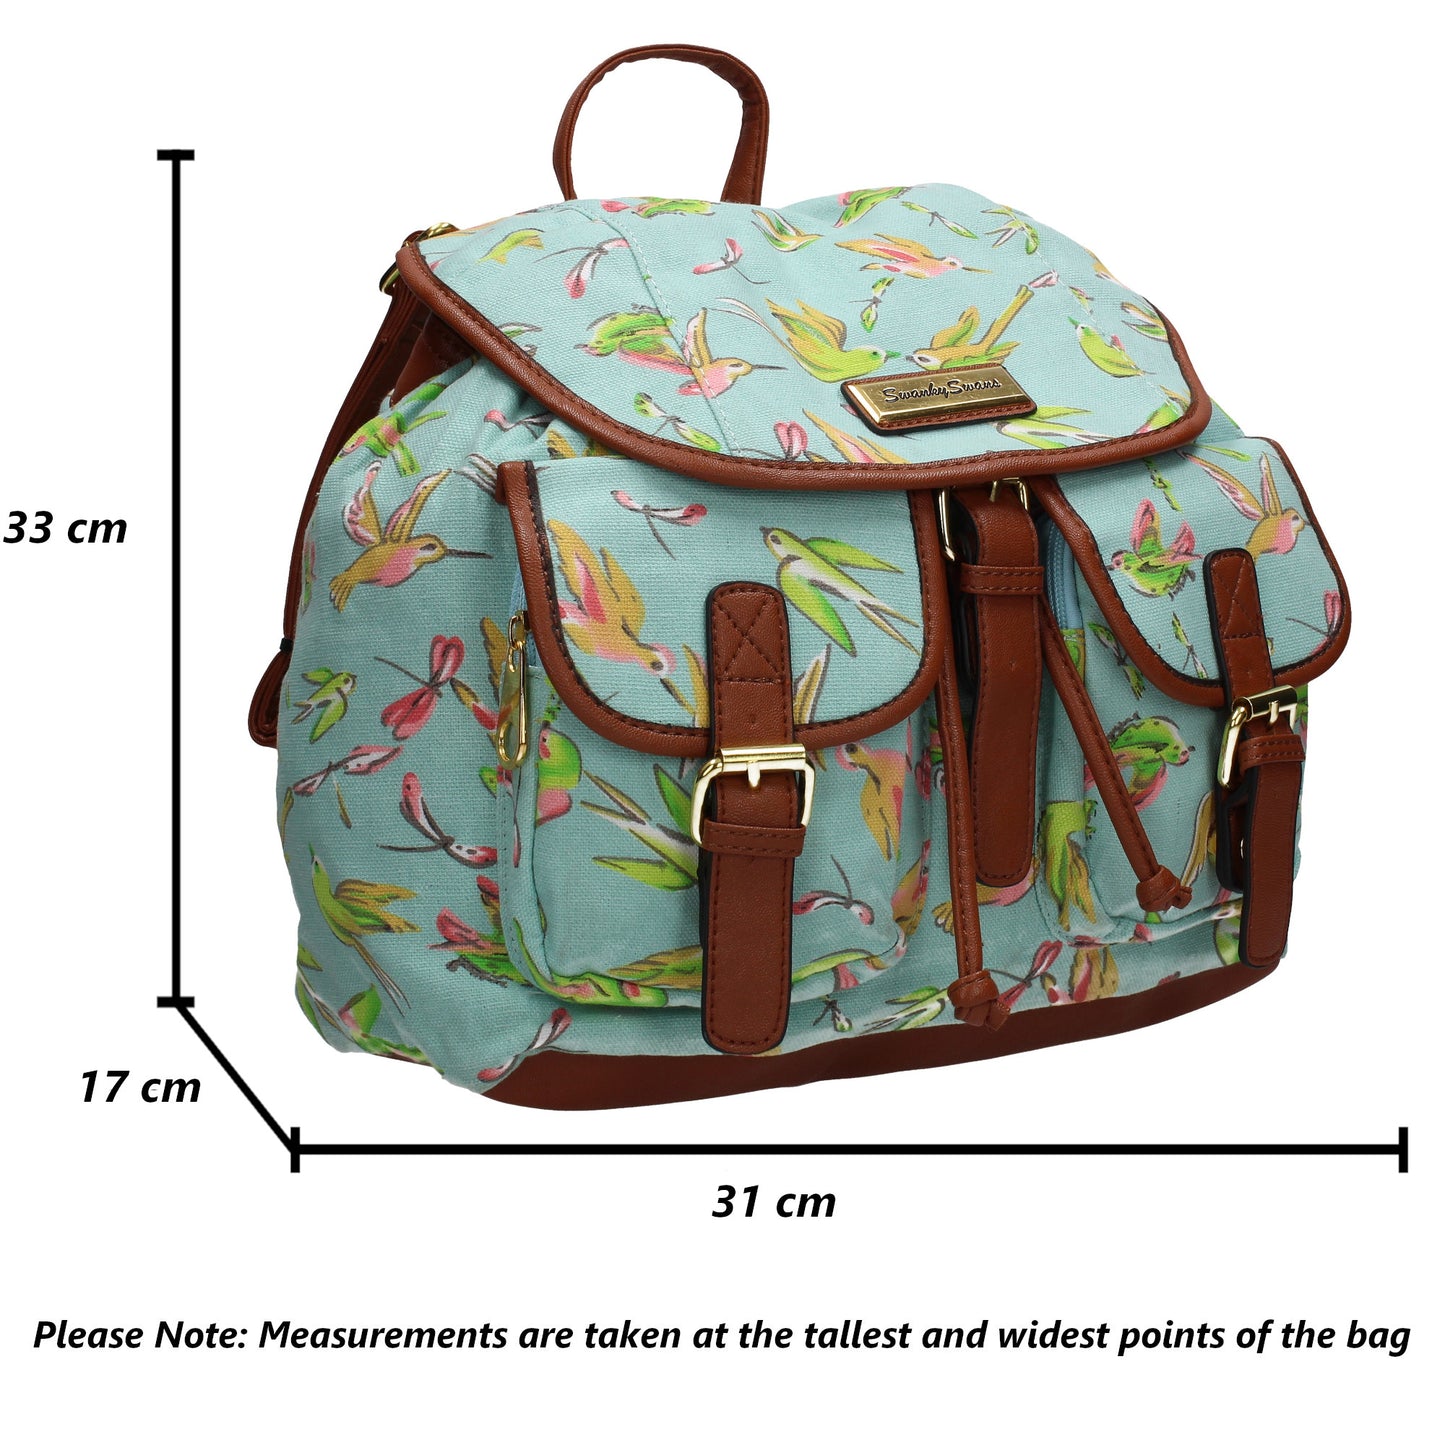 Anna Vintage Birds Canvas Backpack Turquoise